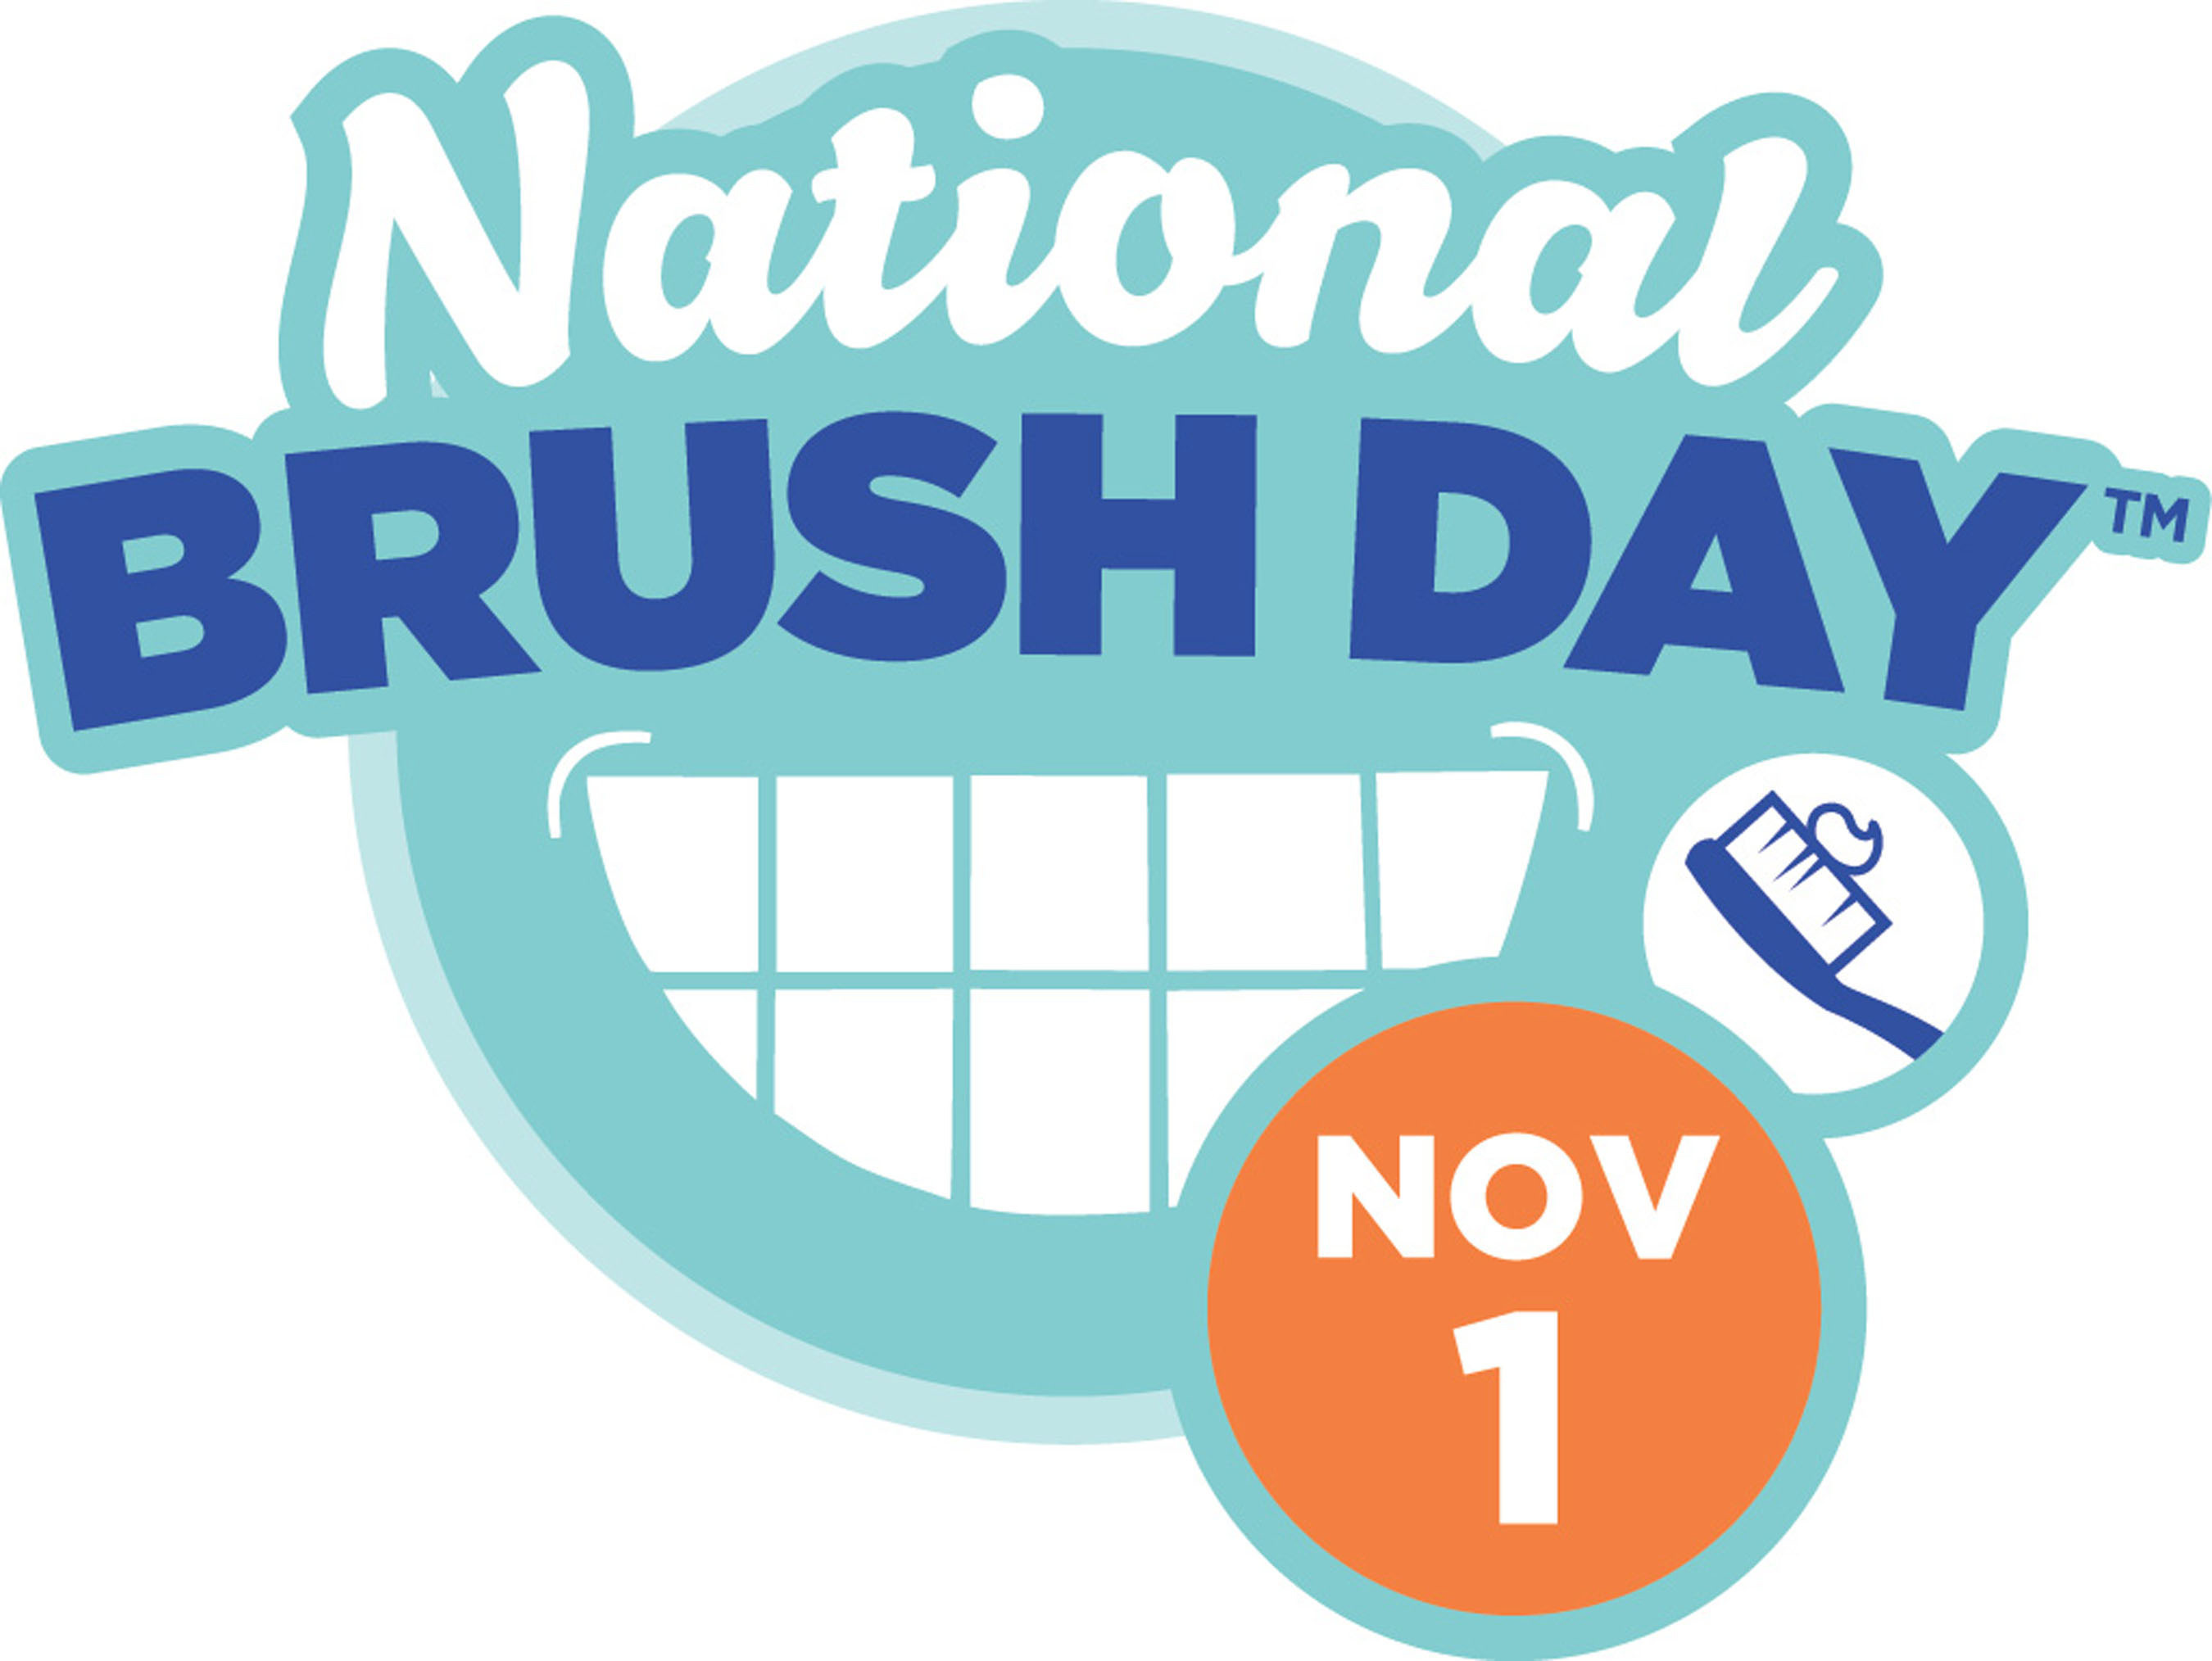 Inaugural 'National Brush Day' Encourages Parents to Keep Kids' Mouths Healthy by Brushing for Two Minutes, Twice a Day. (PRNewsFoto/The Ad Council) (PRNewsFoto/THE AD COUNCIL)